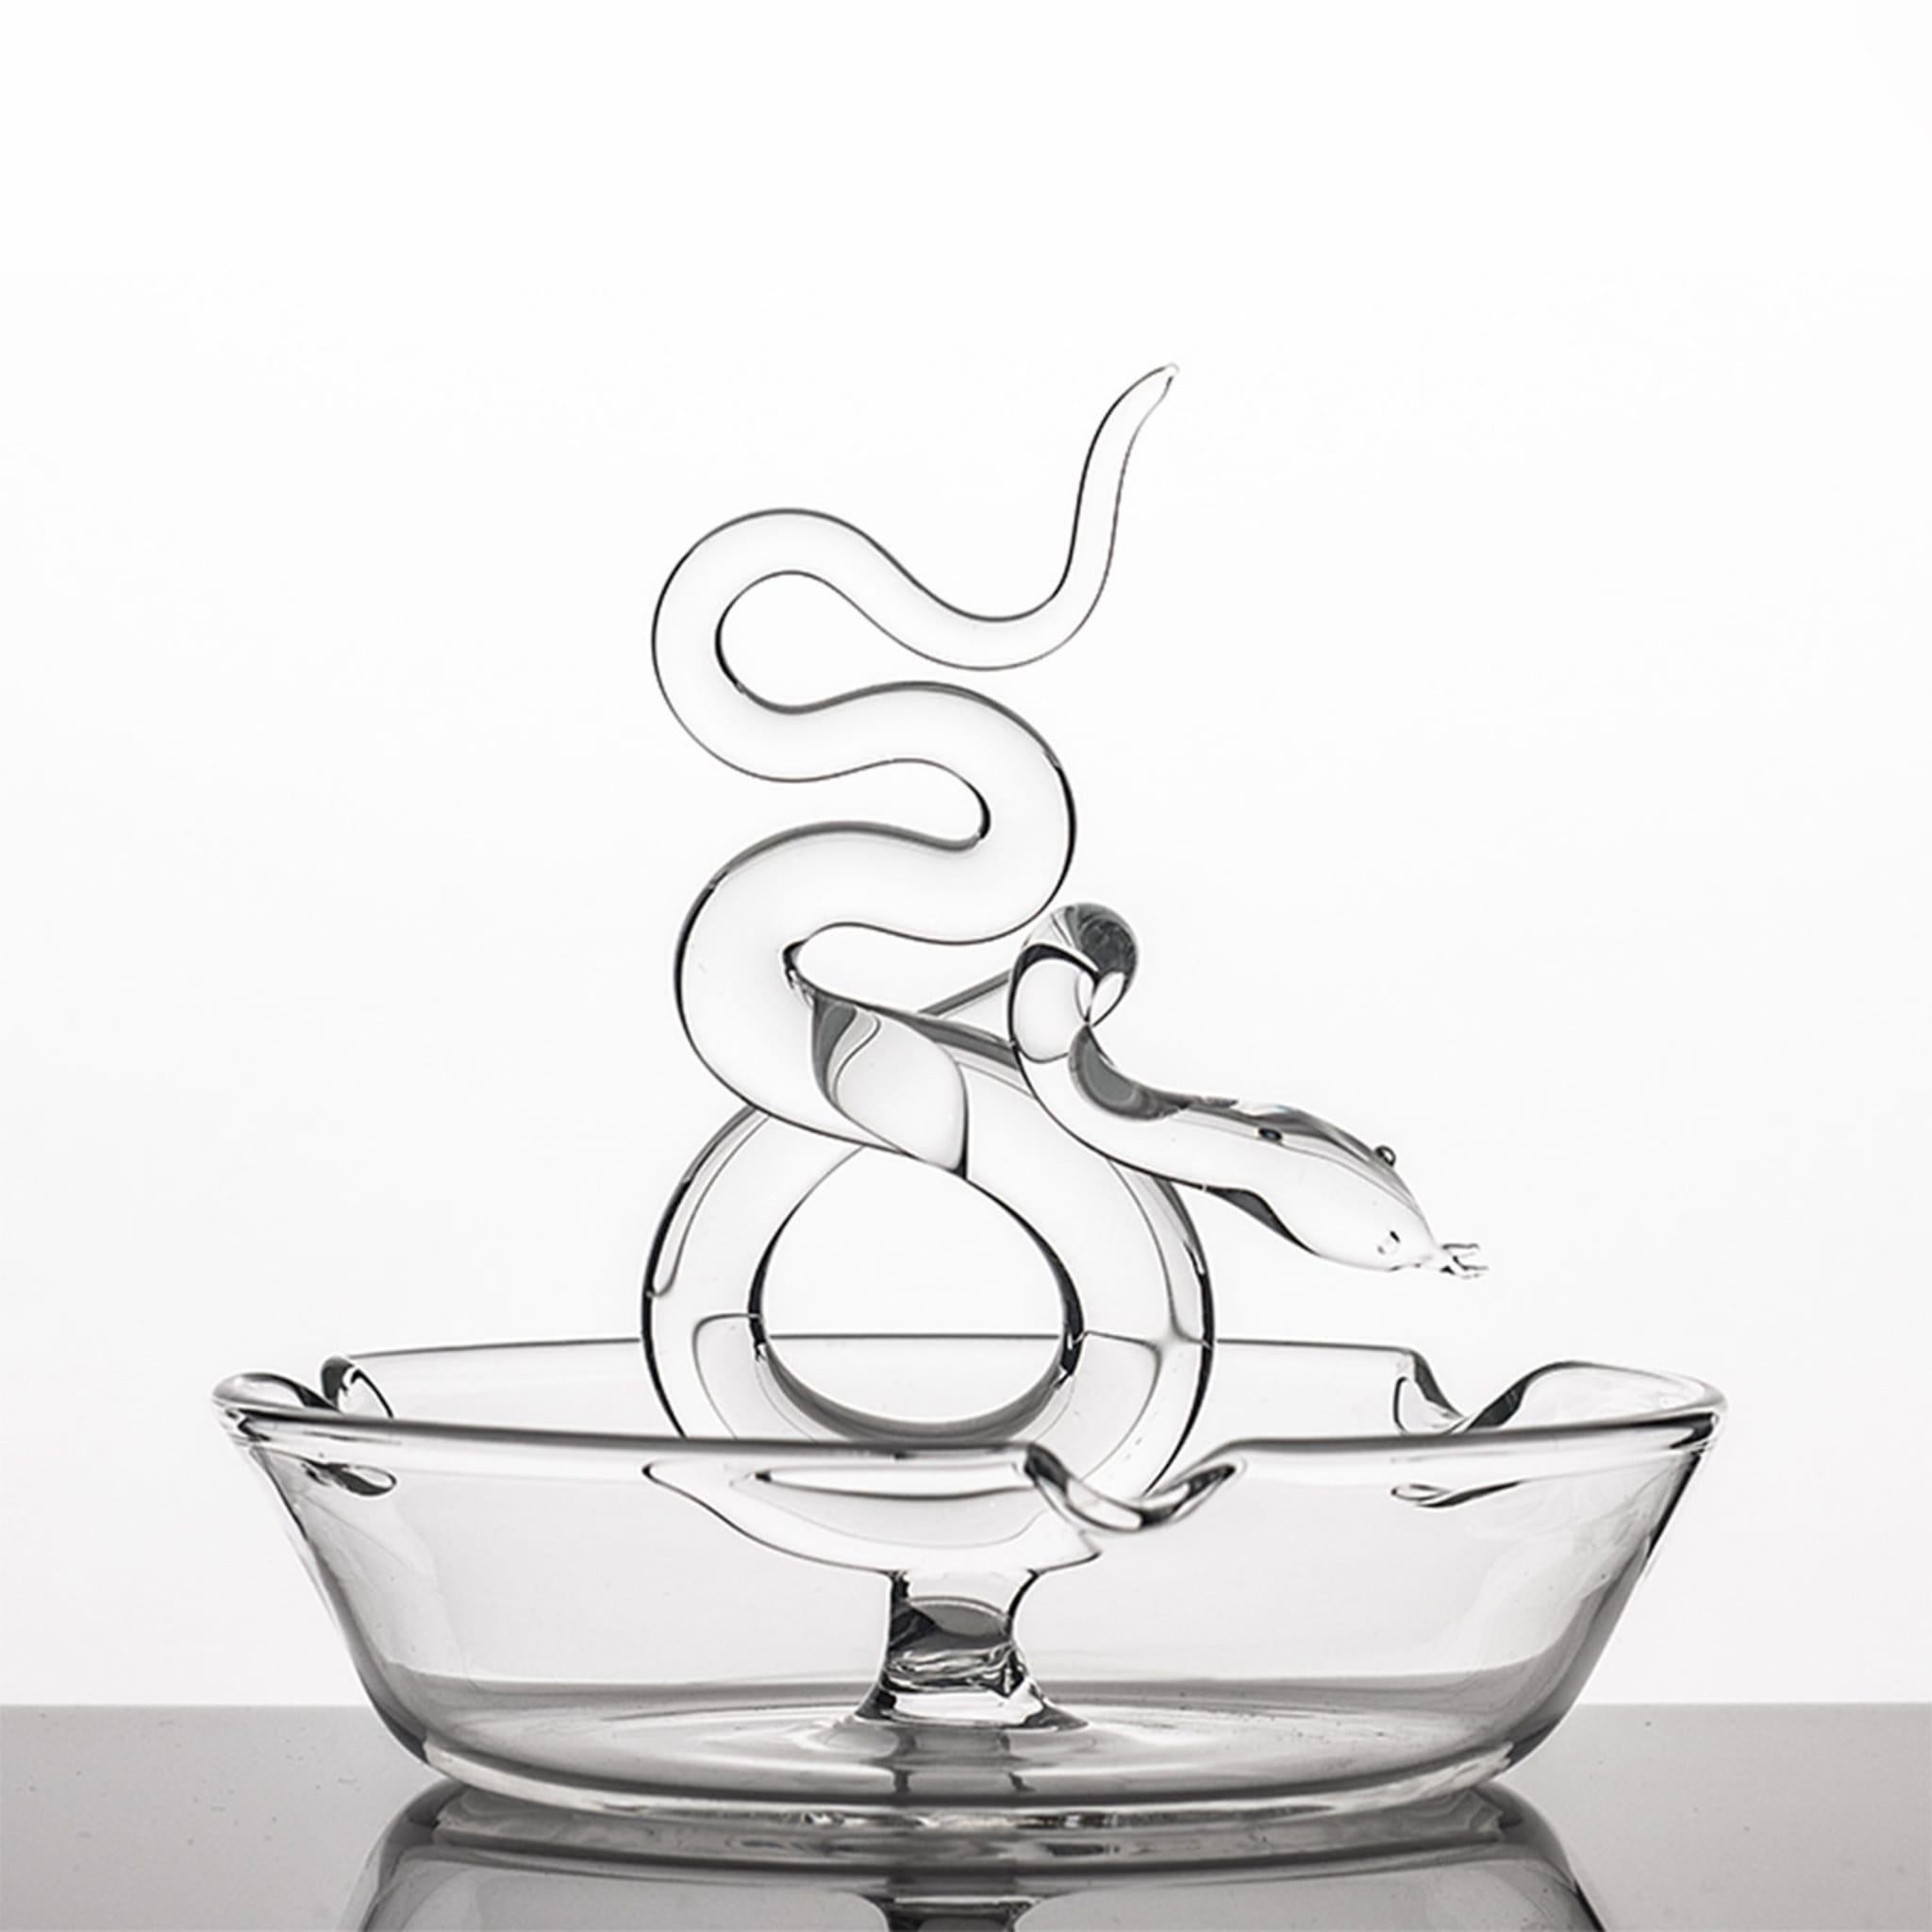 Part of the Serpentine collection, designed by master glassmaker Simone Crestani, this ashtray is inspired by the symbolism and mesmerizing charm of the snake. Handcrafted entirely of glass, it features a round silhouette with two notches at the rim